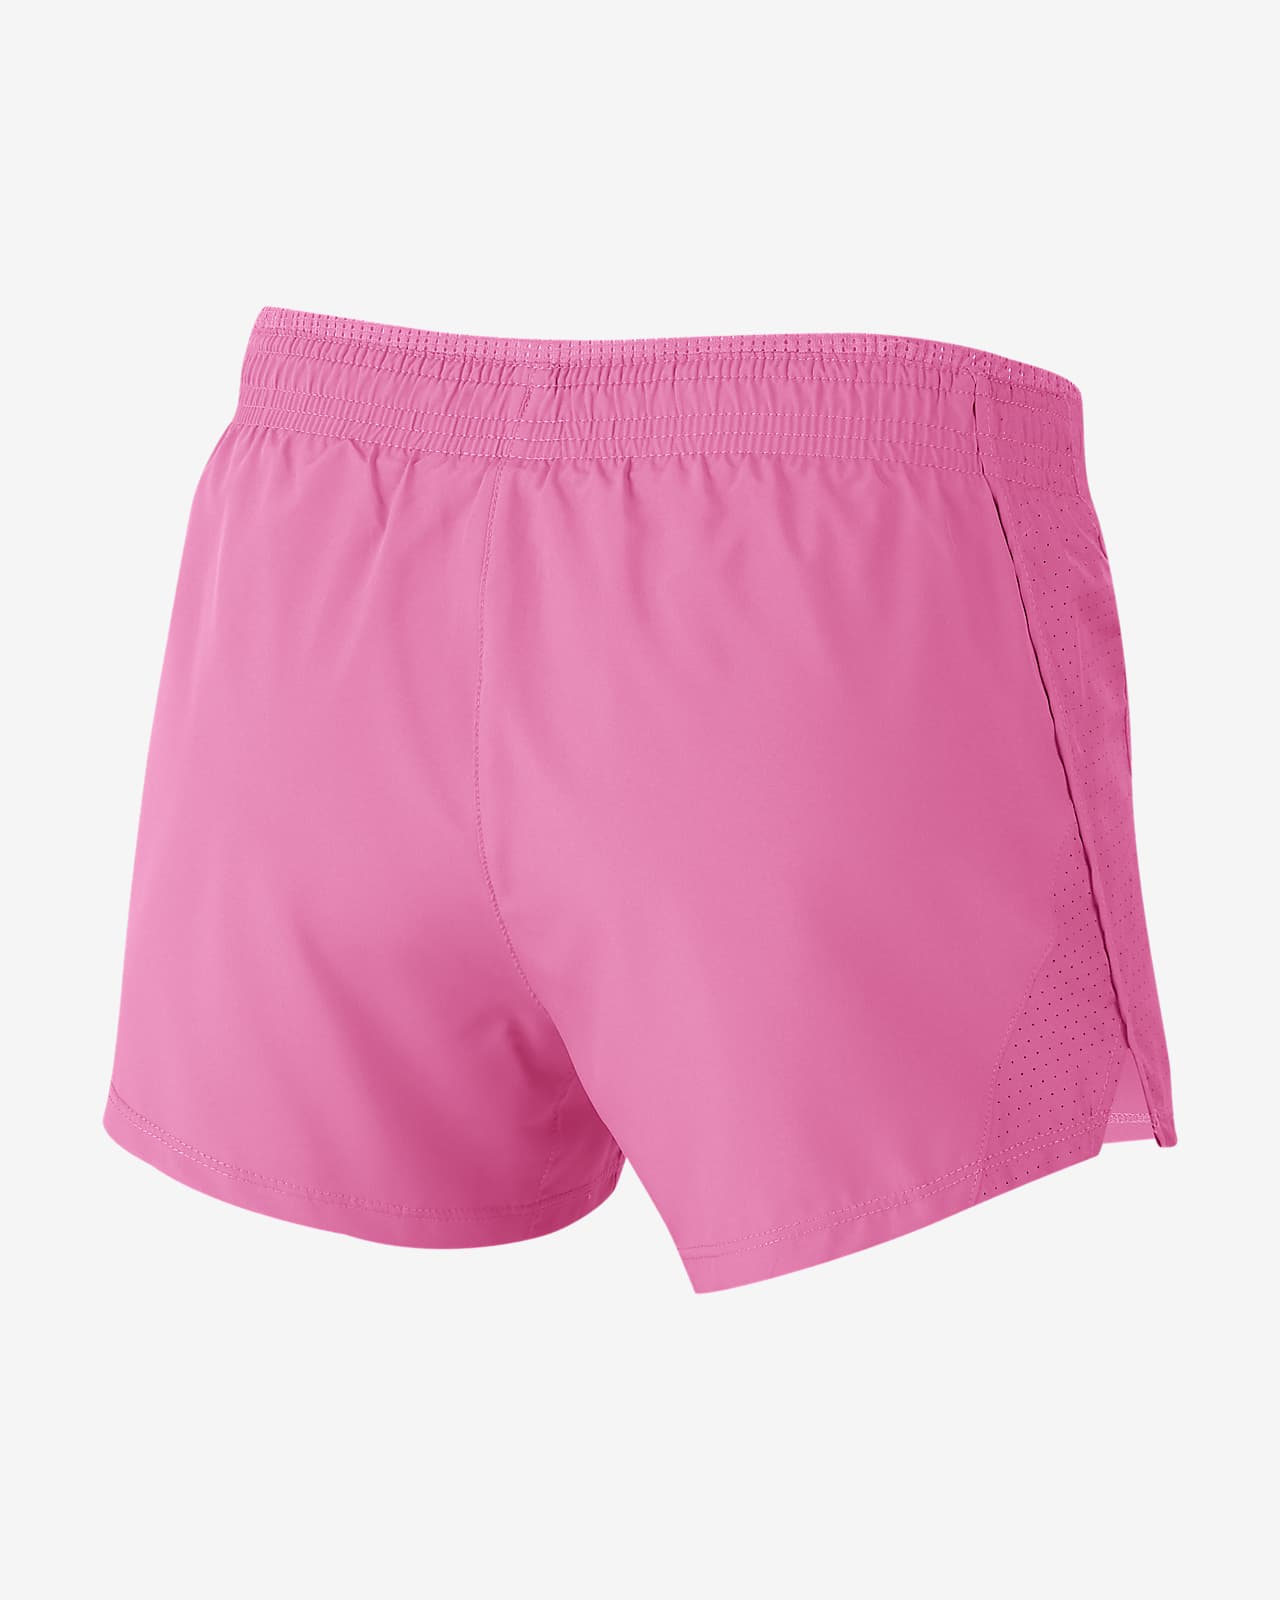 2 in 1 shorts with compression womens